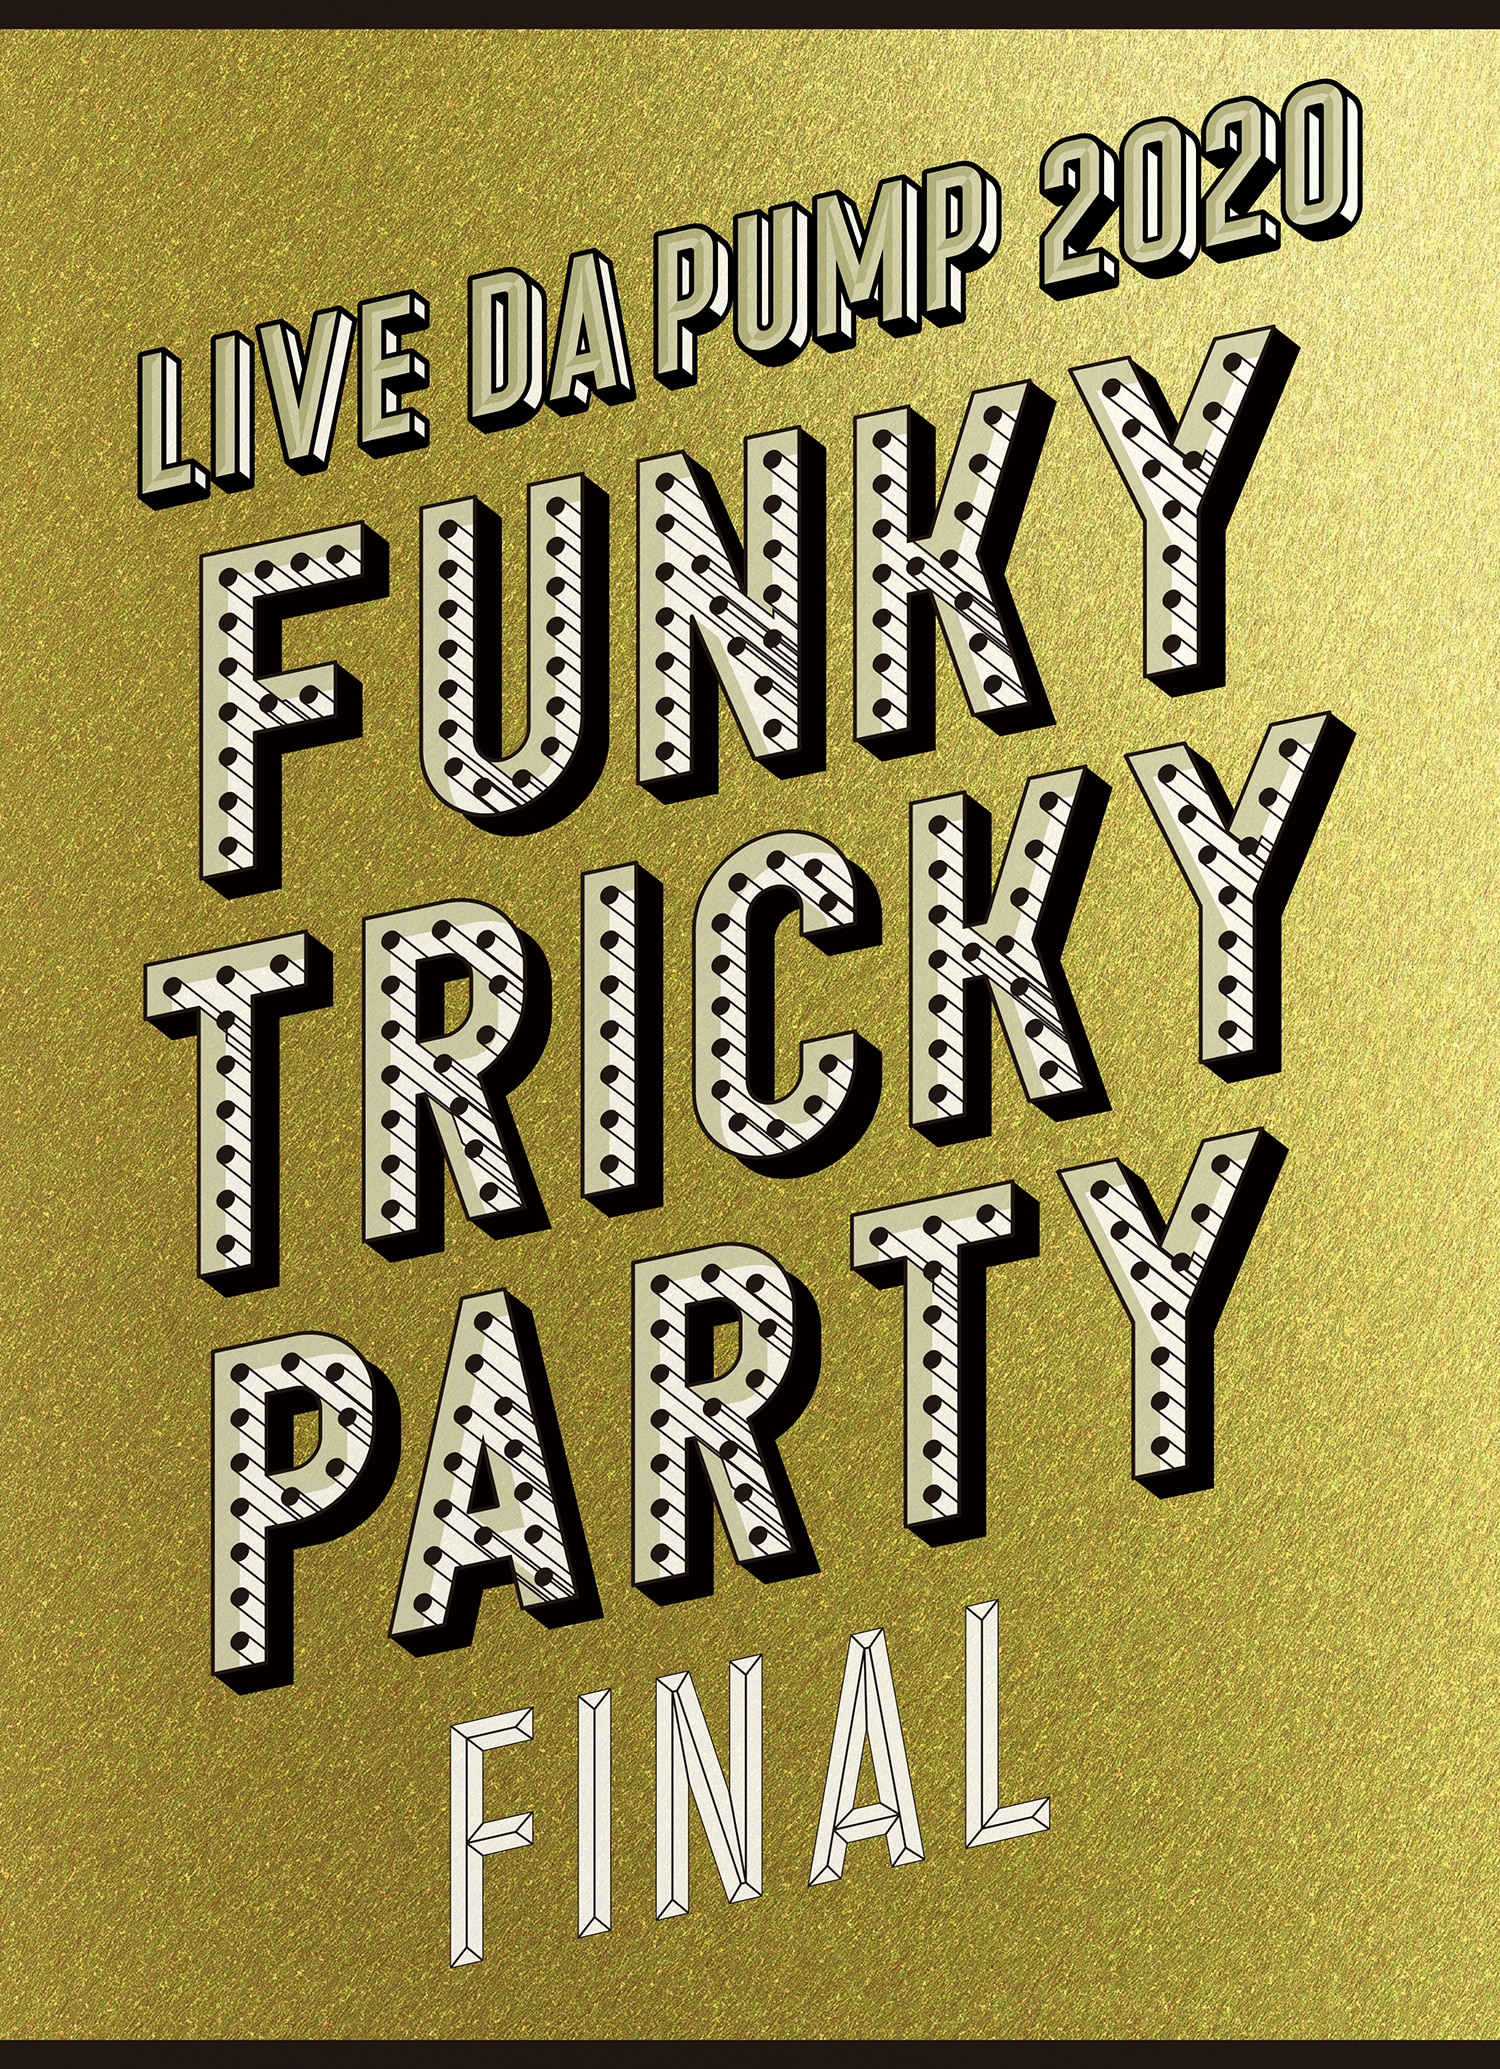 [4DVD＋2CD＋PHOTO BOOK+スマプラ・ムービー] 「LIVE DA PUMP 2020 Funky Tricky Party FINAL at さいたまスーパーアリーナ」